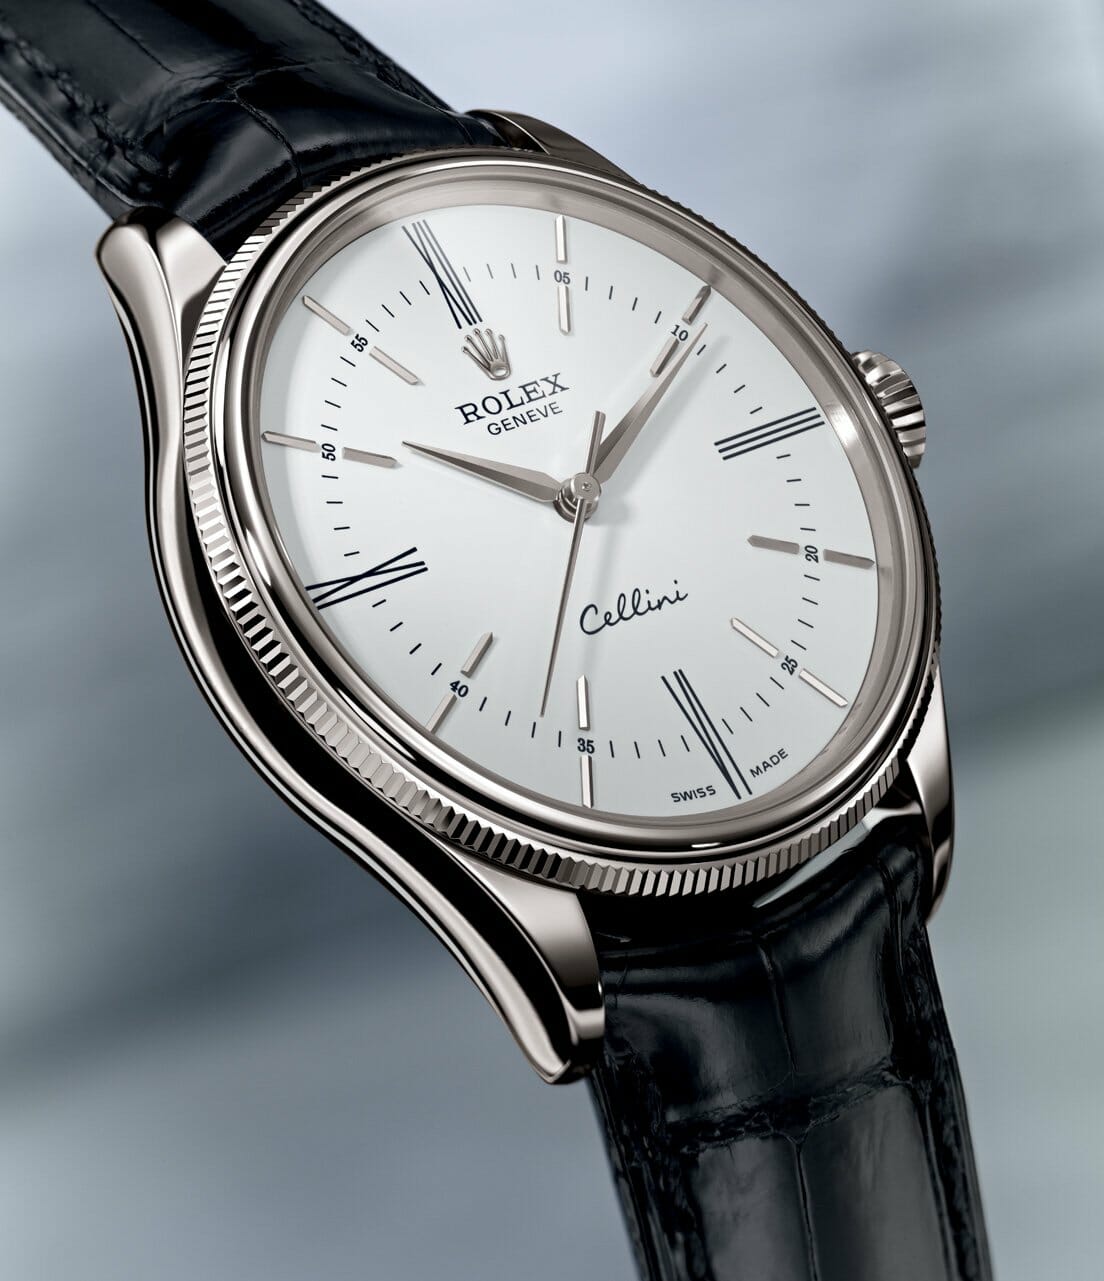 Sell Rolex Cellini Watch - Sell My Rolex